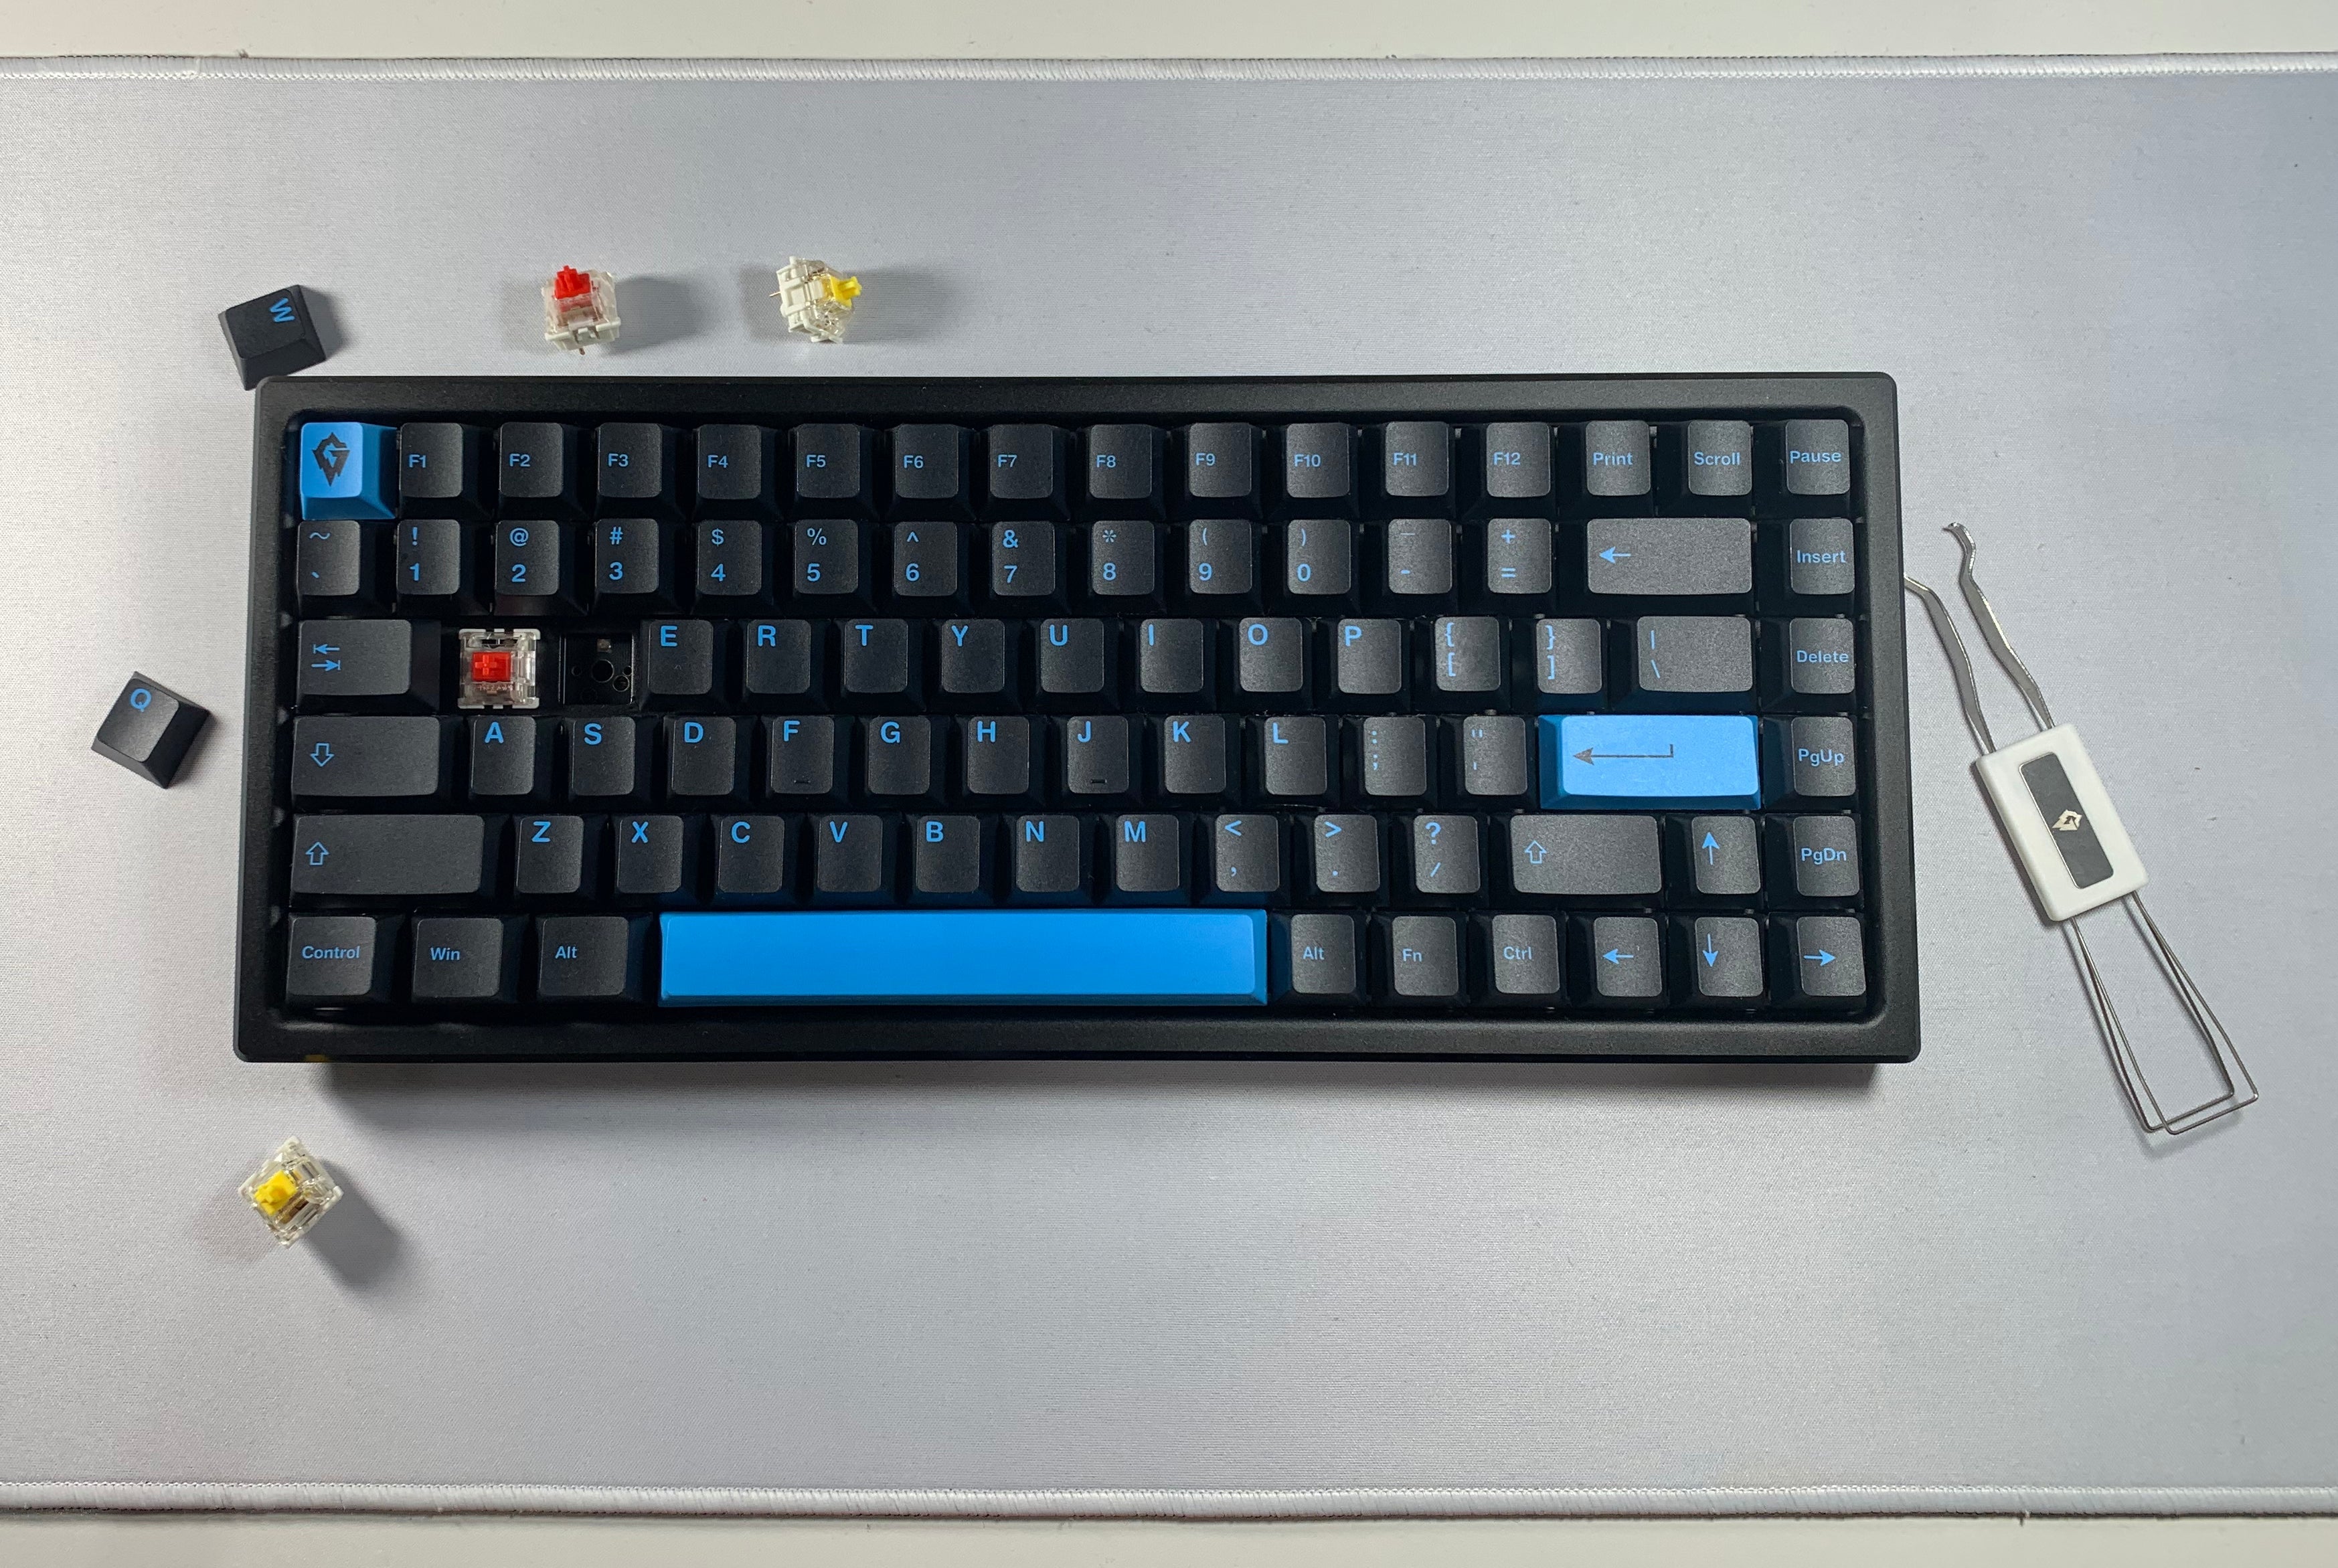 Blogs/Updates-Guide to Build Your Own Custom Mechanical Keyboard-Glacier-PC-Gaming